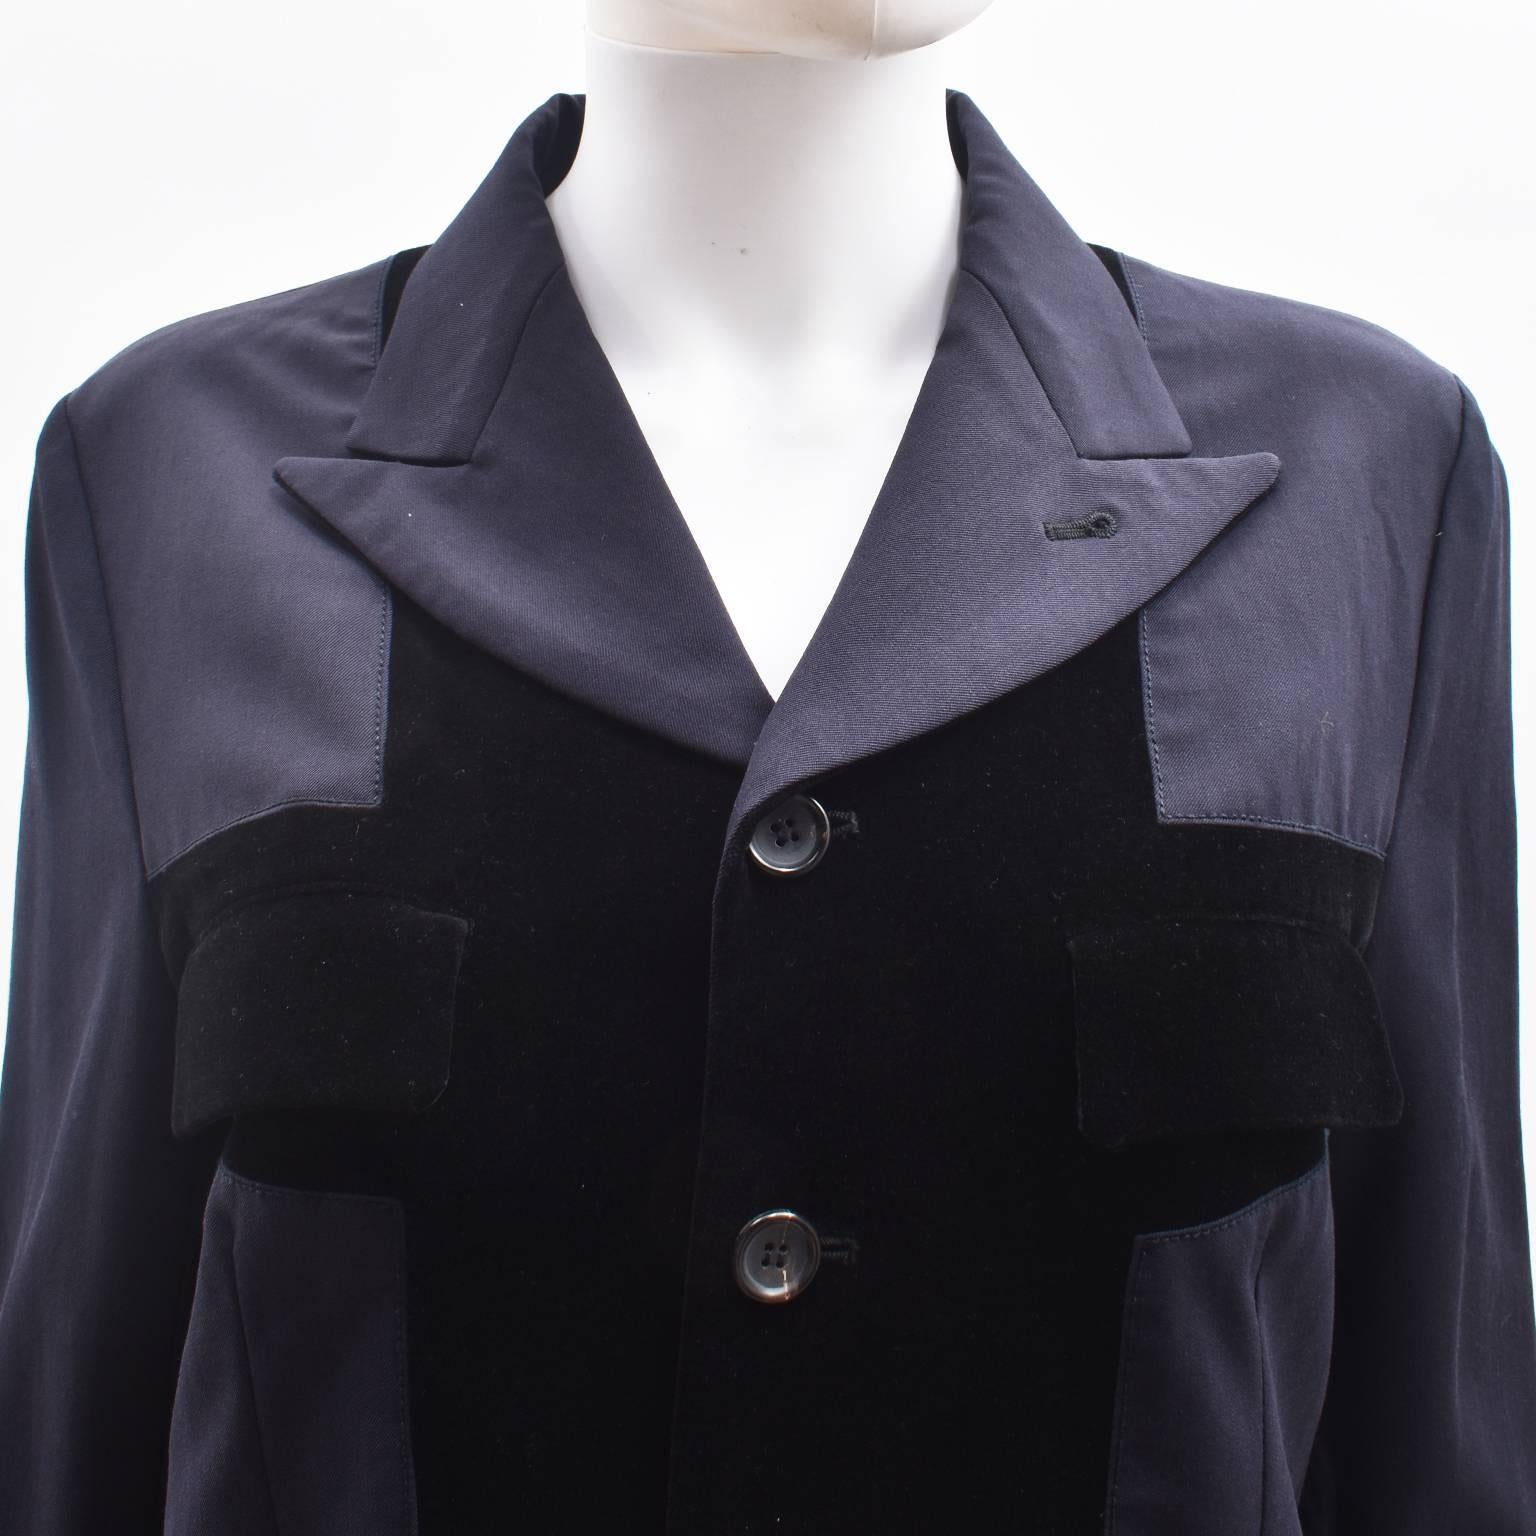 A classic Comme des Garcons navy blazer with contrast velvet panels. The jacket has a simple, straight shape, with notched collar, button fastening and flap pockets at the bust and hip. The velvet panels are stitched in a cross shape across the